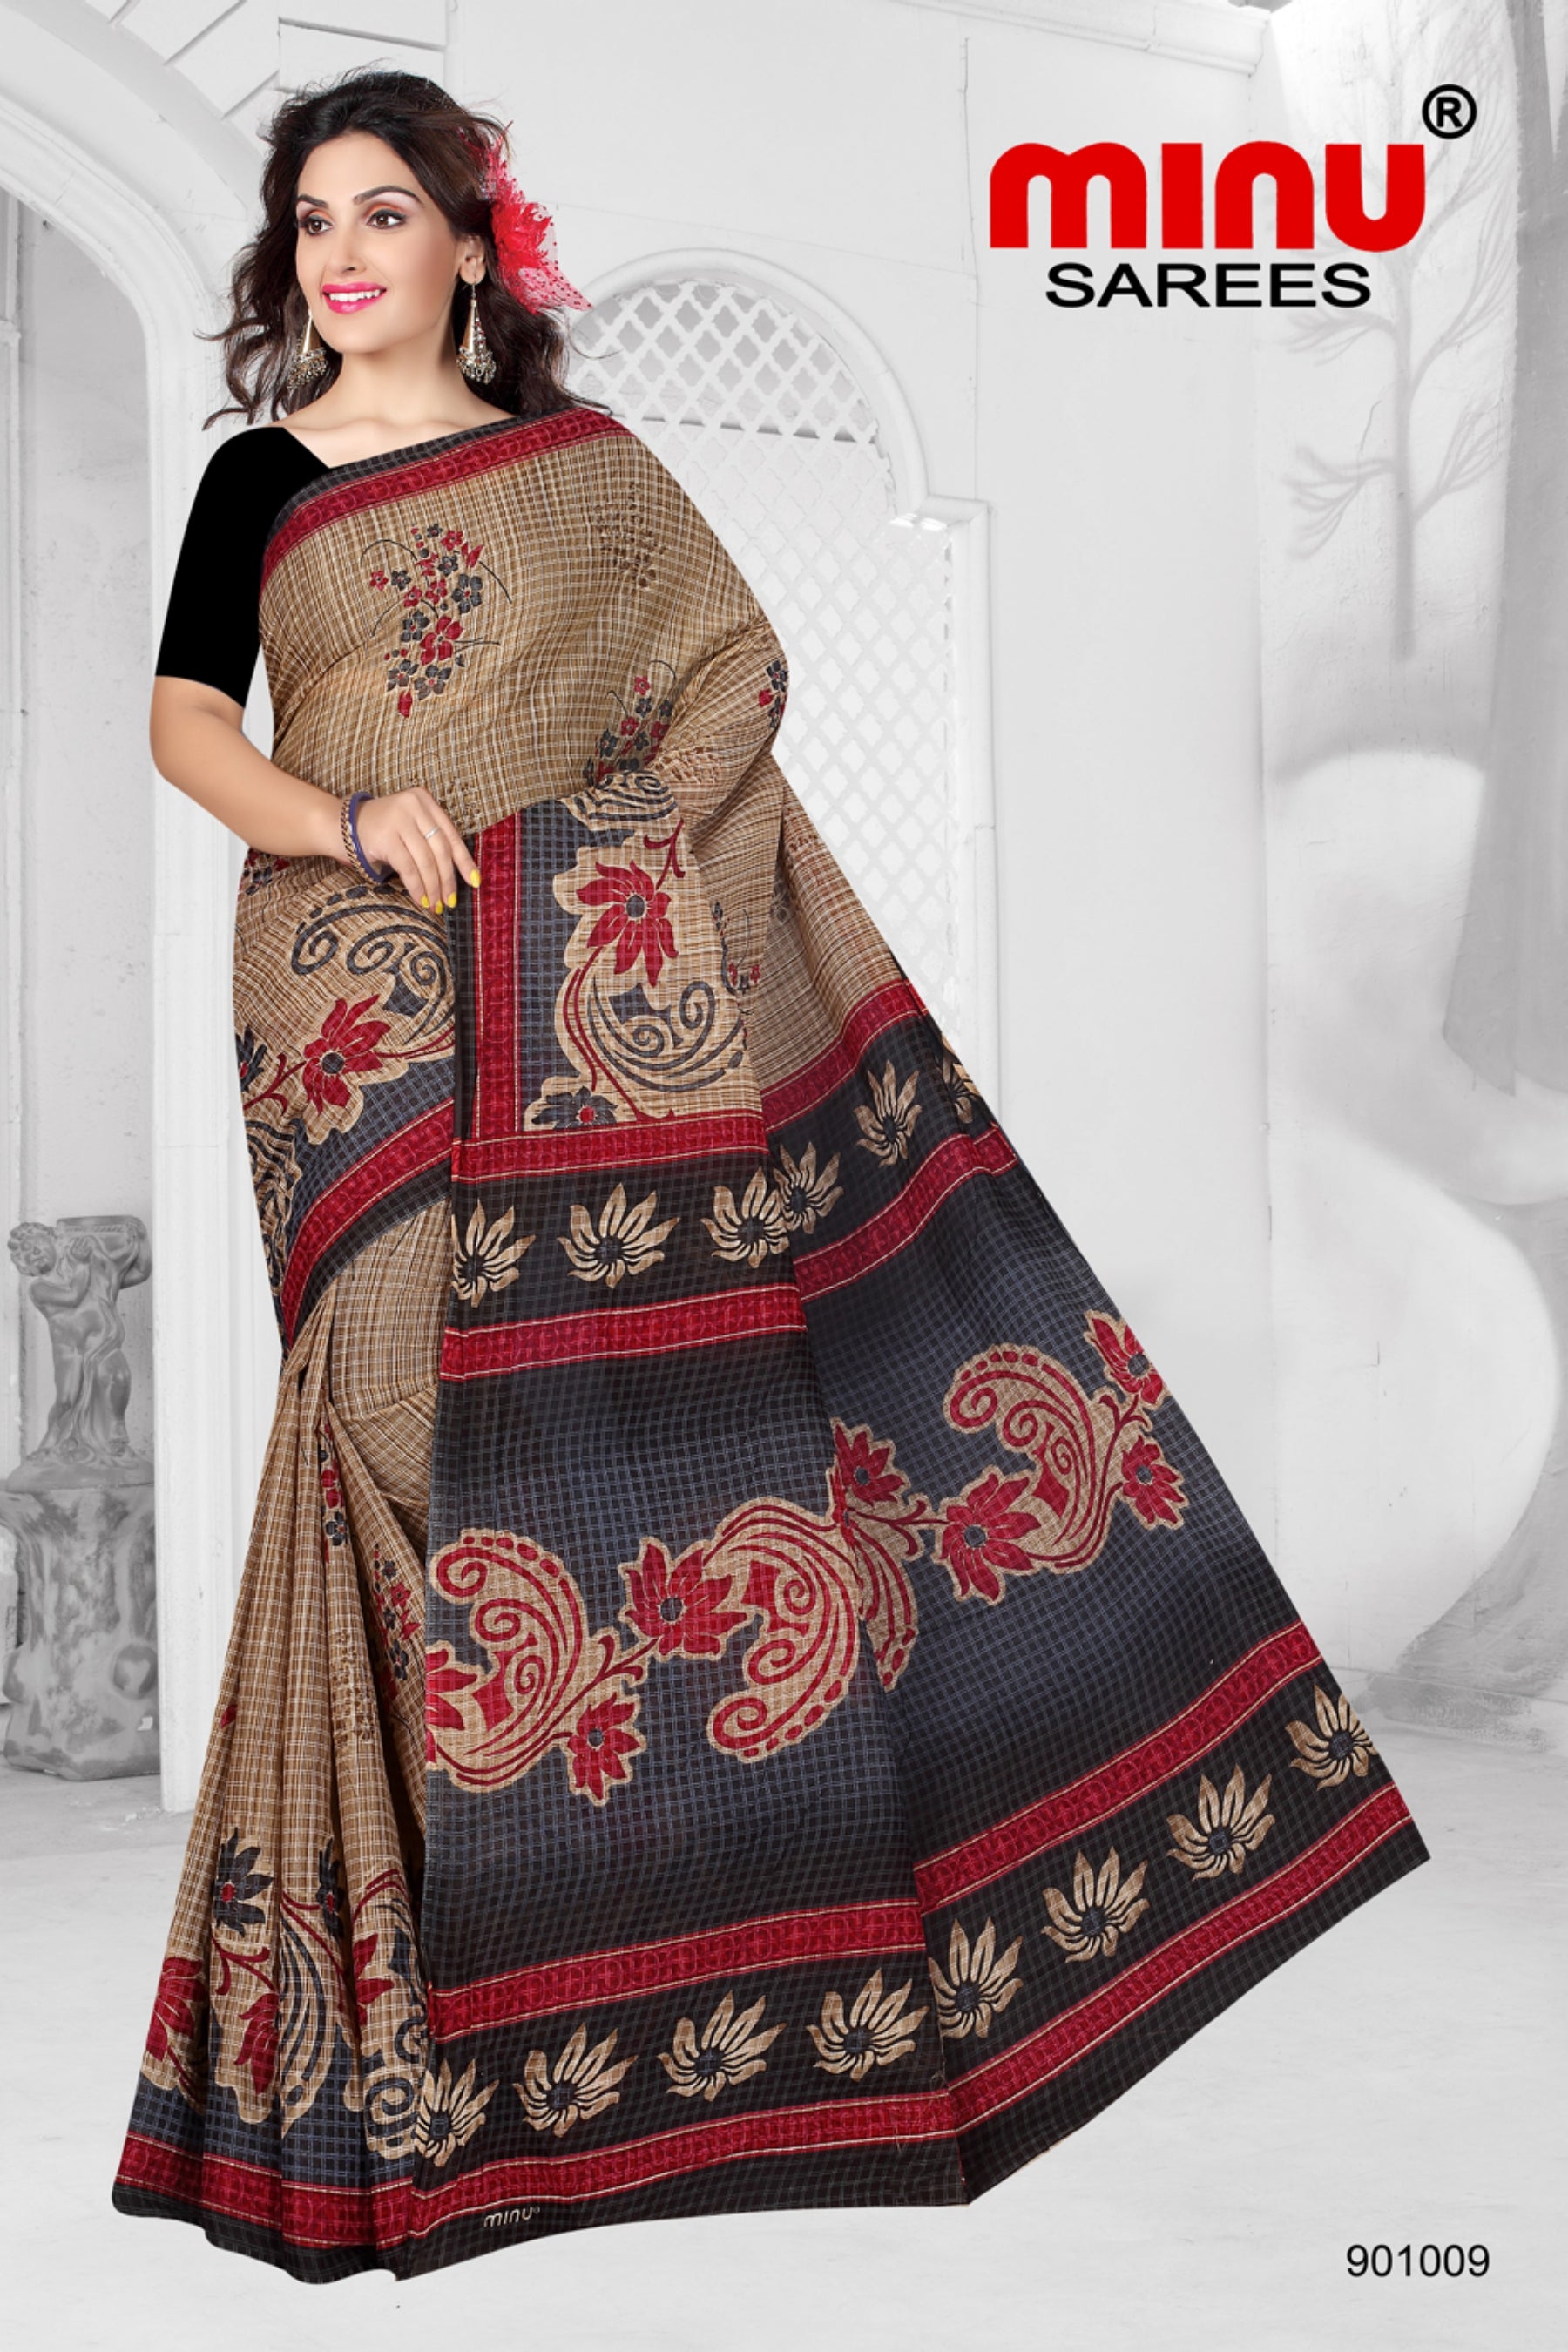 Cotton printed saree for women at low prices